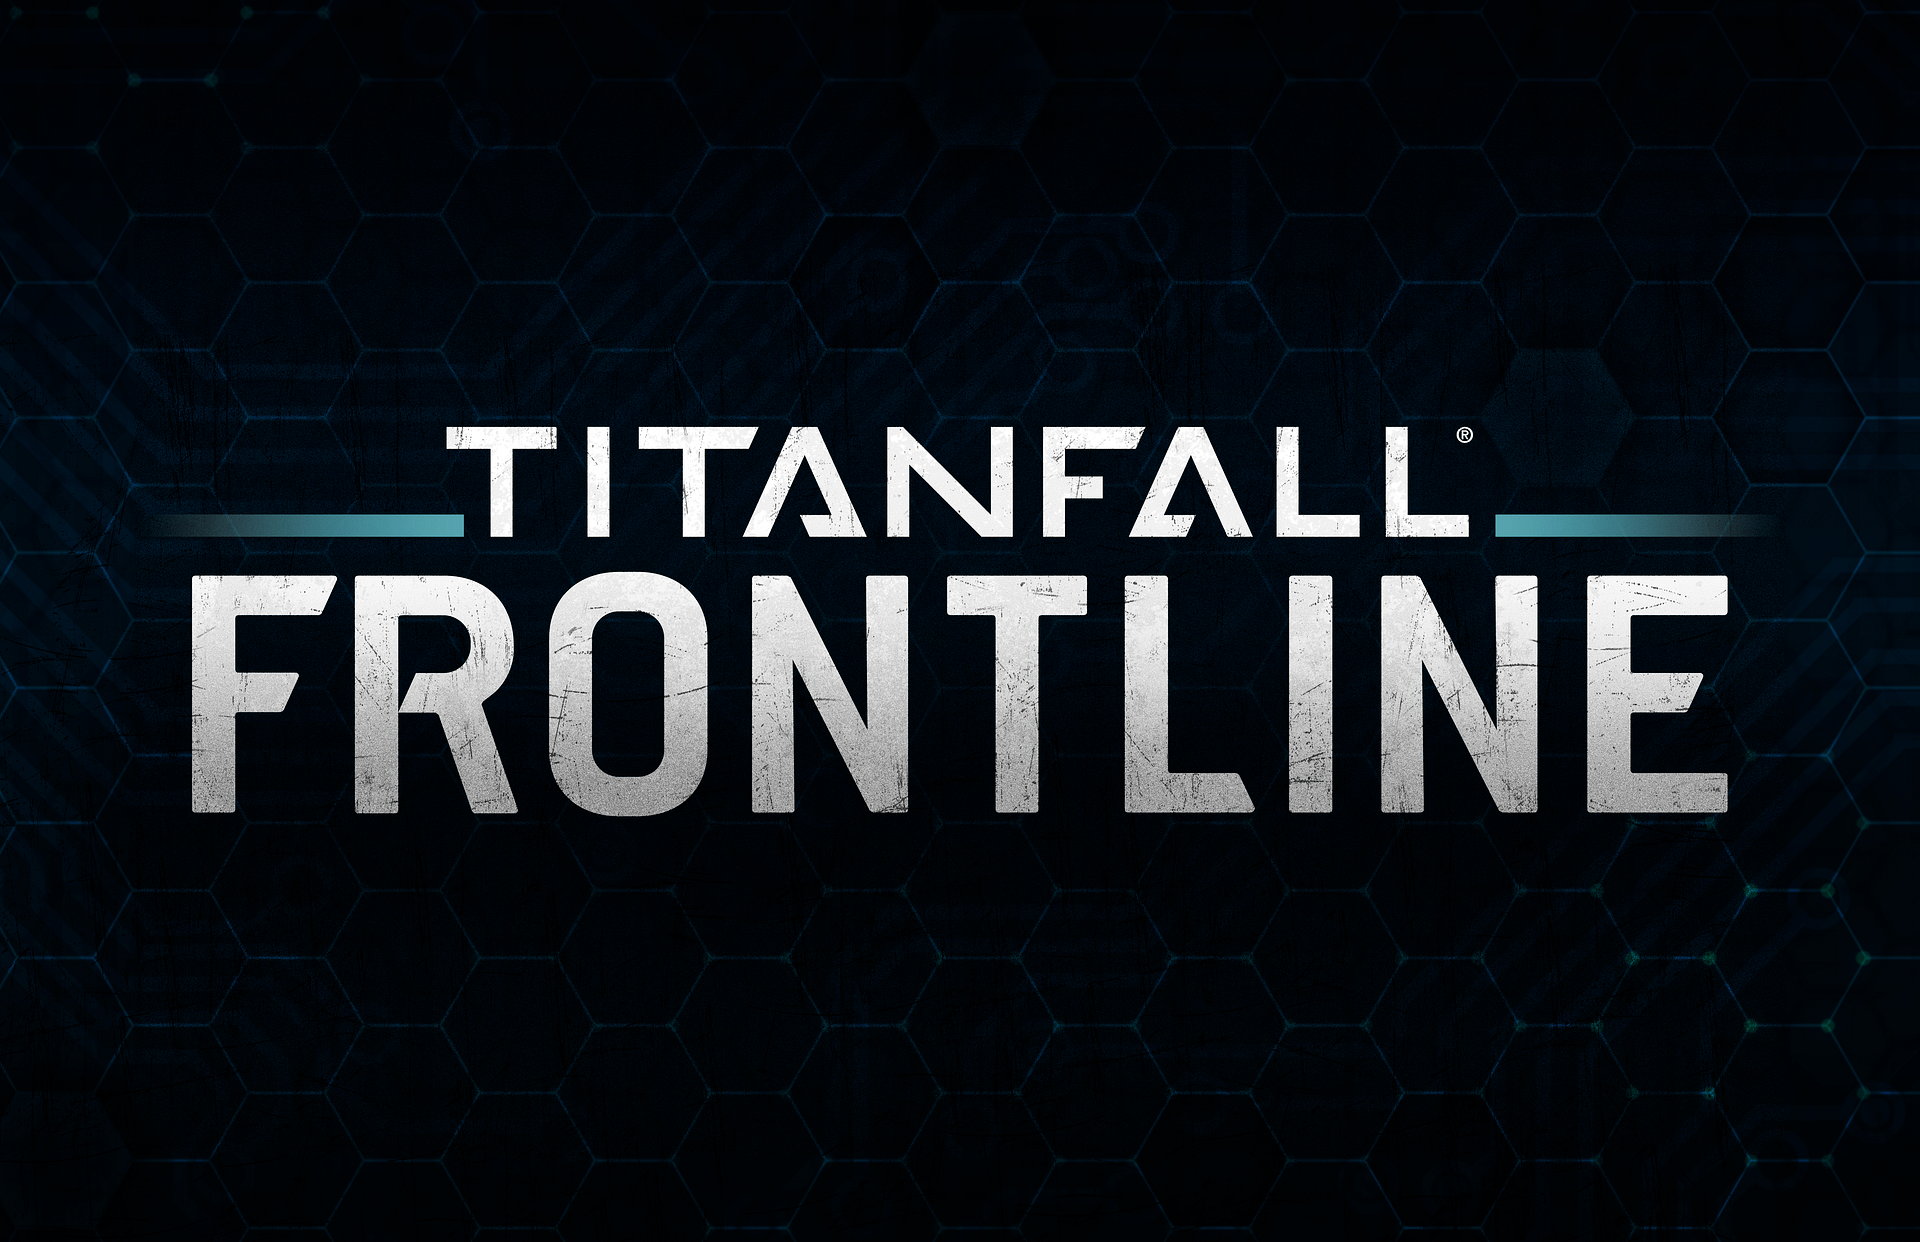 Titanfall is getting a series of mobile games, beginning this Fall with Titanfall: Frontline